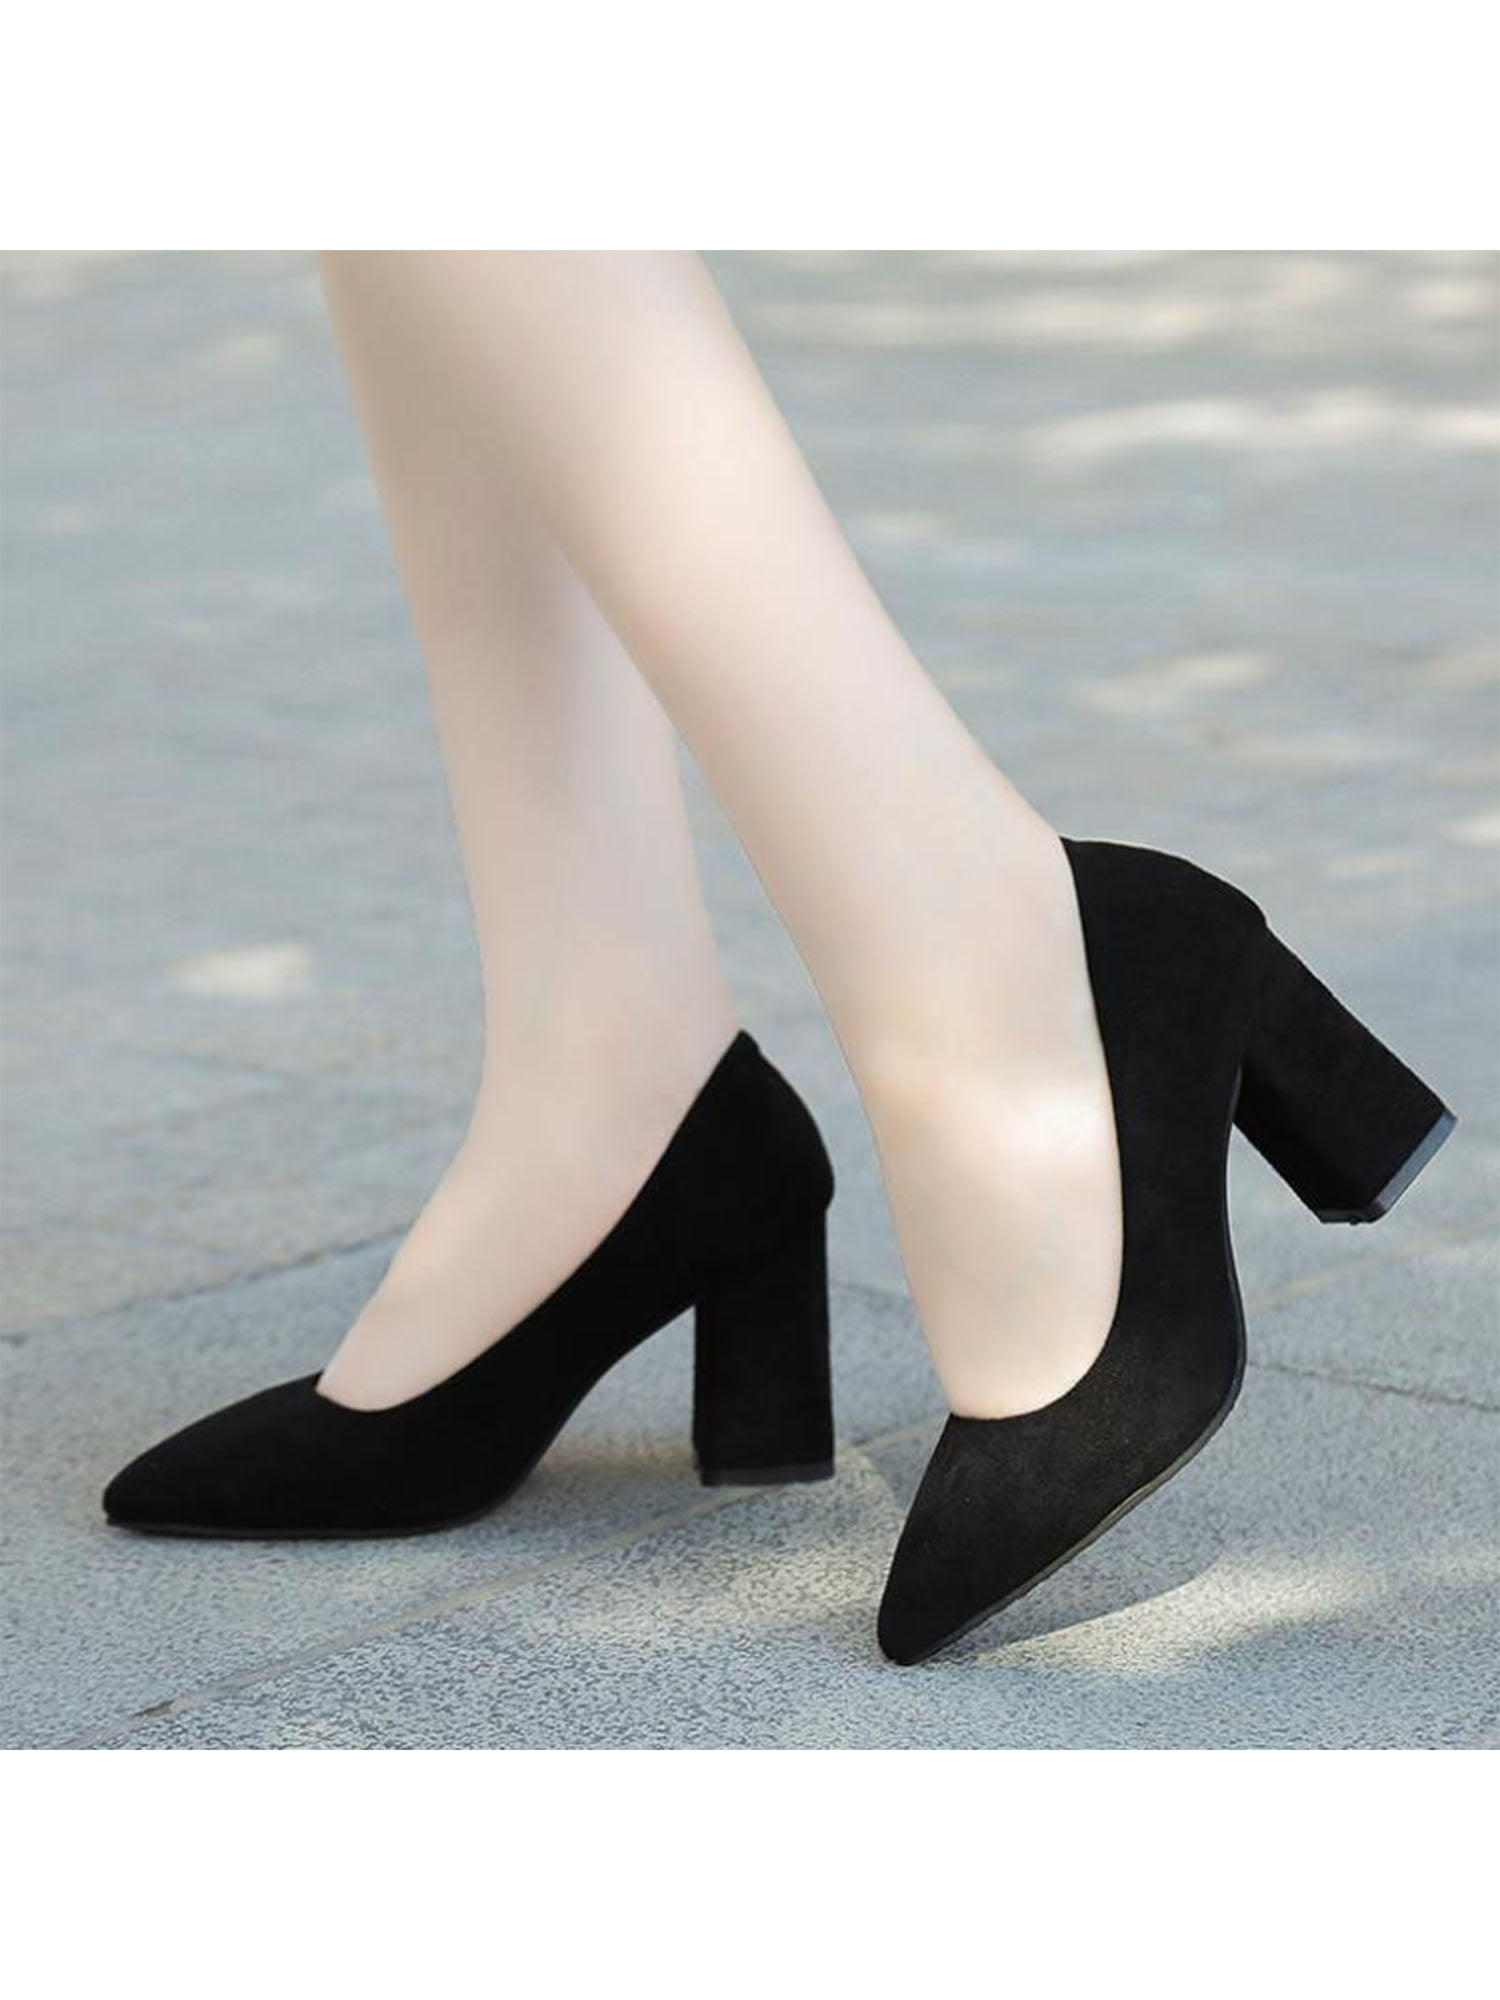 Details about   Rabbit Hair Women's High Heels Shoes Party Wedding Women Pointed Toe Dress Shoes